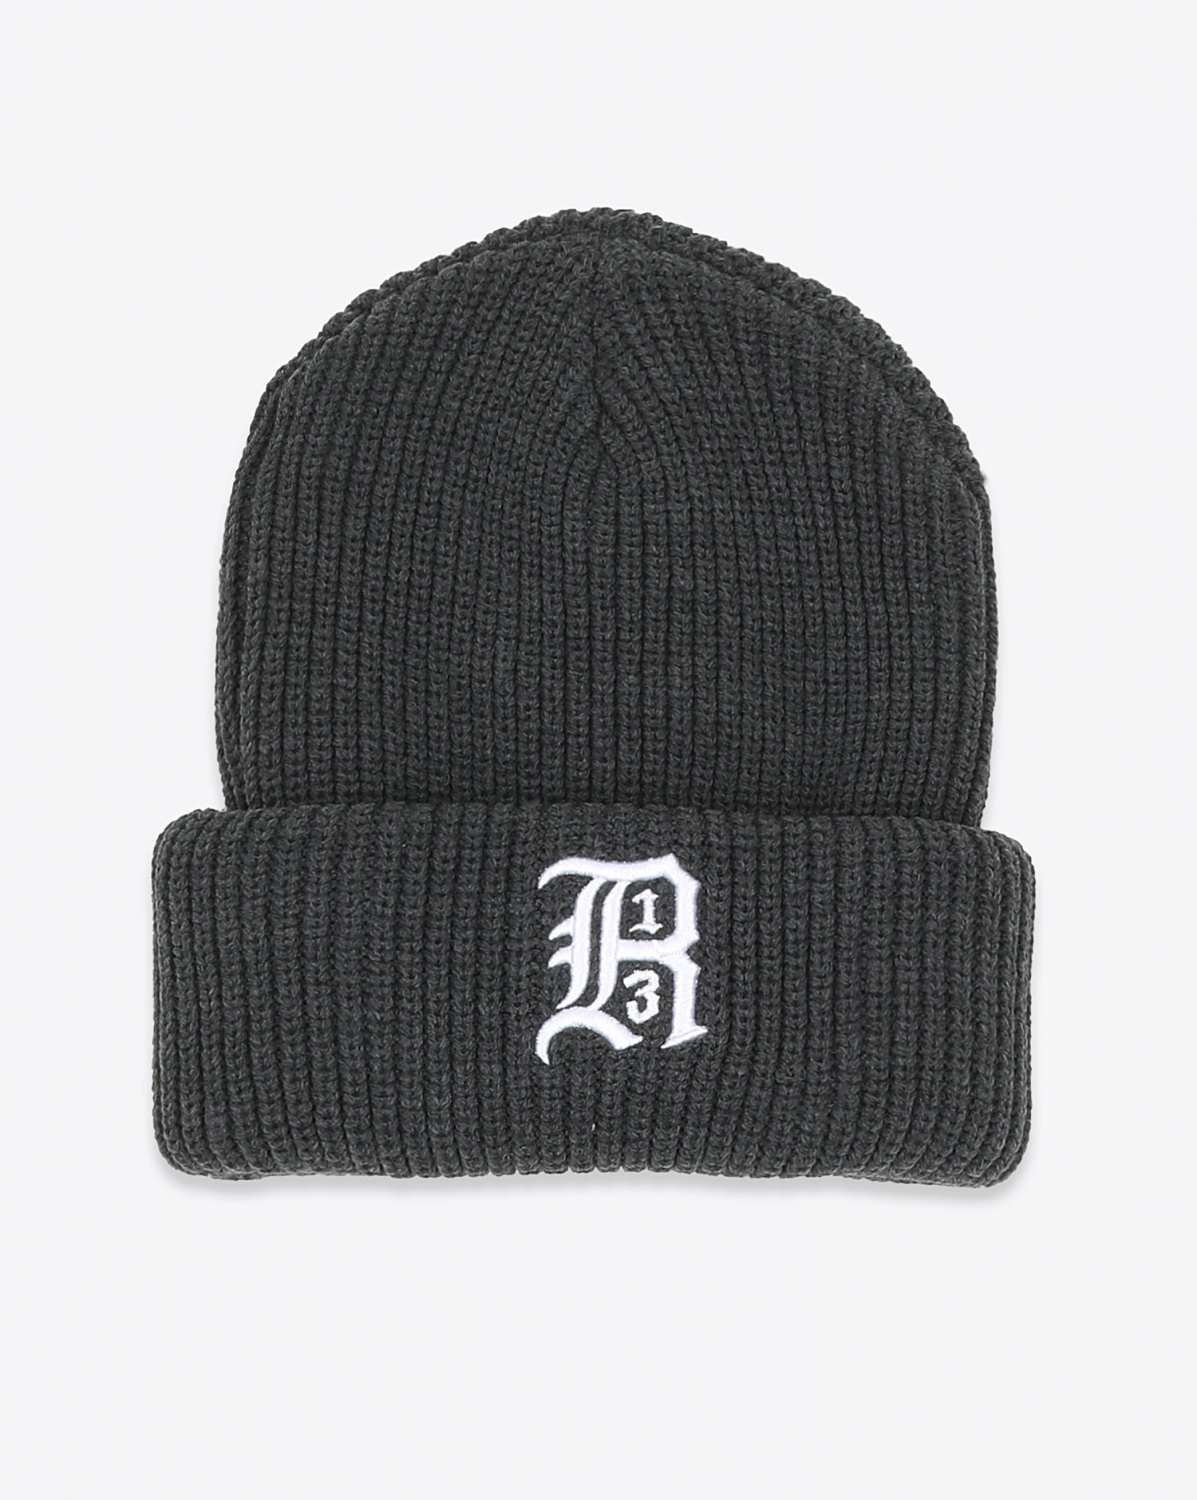 Bonnets R13 Denim Collection Beanie W/Embroidery - Heather Grey